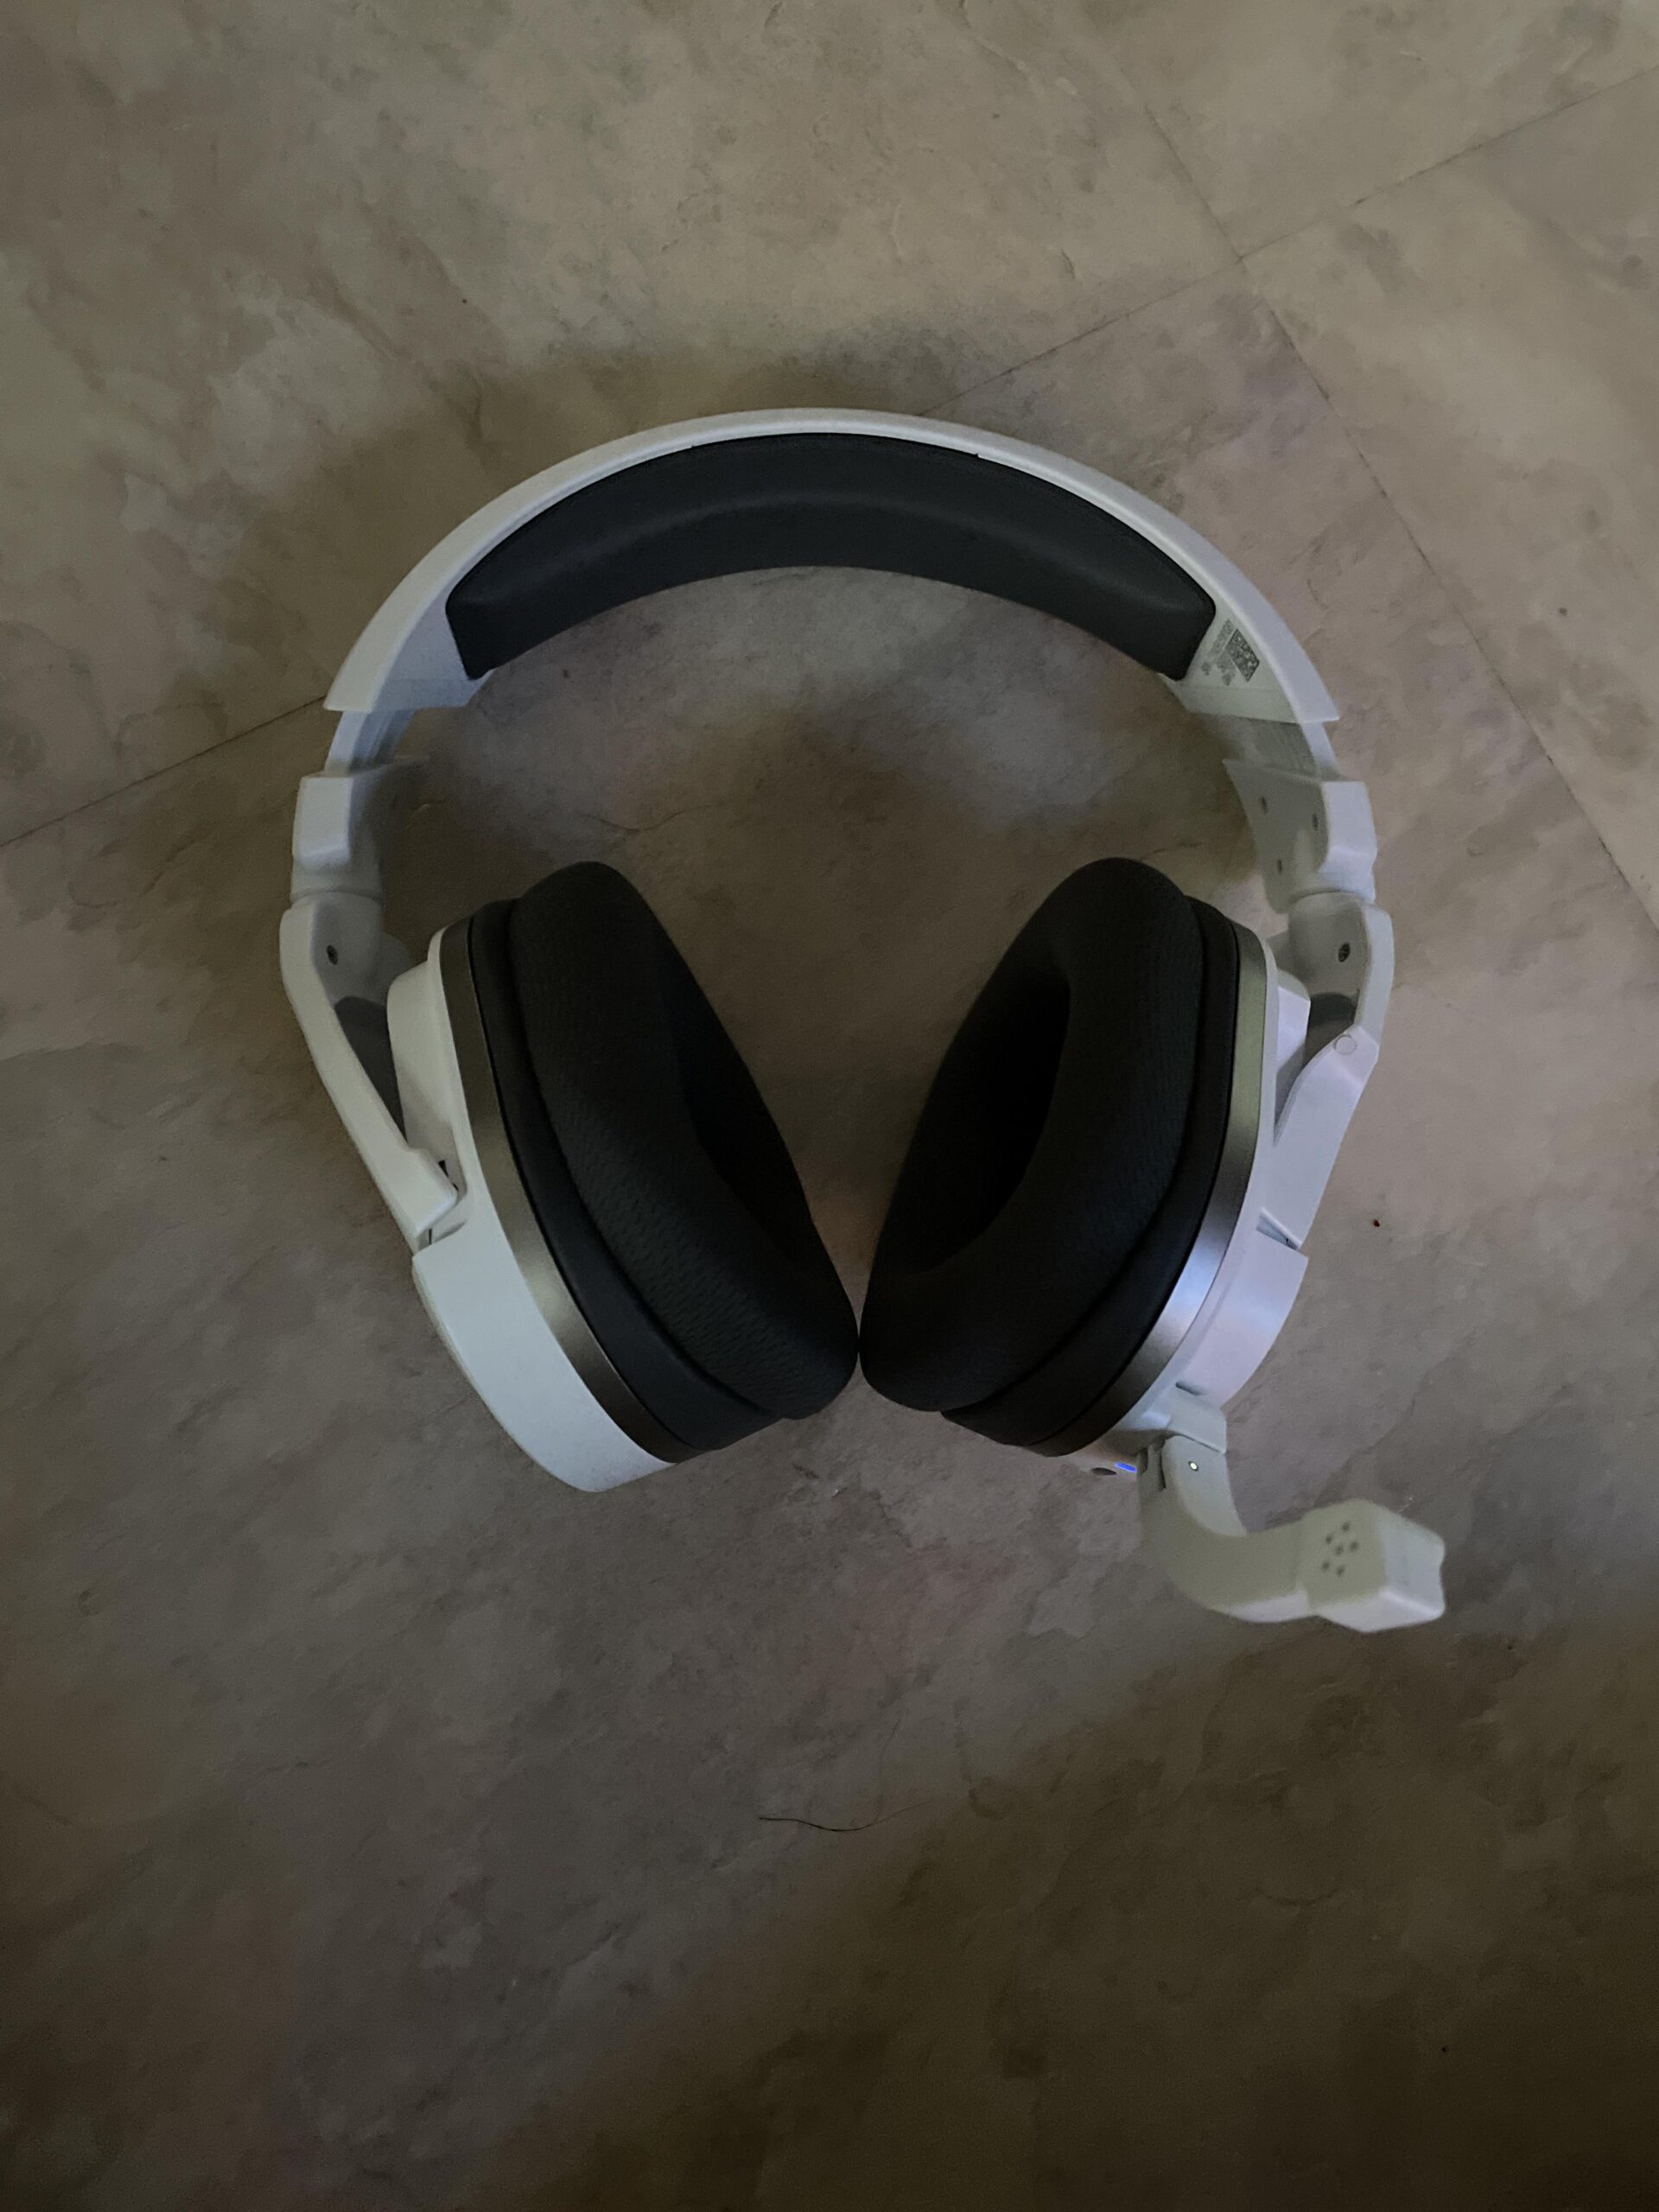 Why Do My Turtle Beaches Keep Cutting Out?